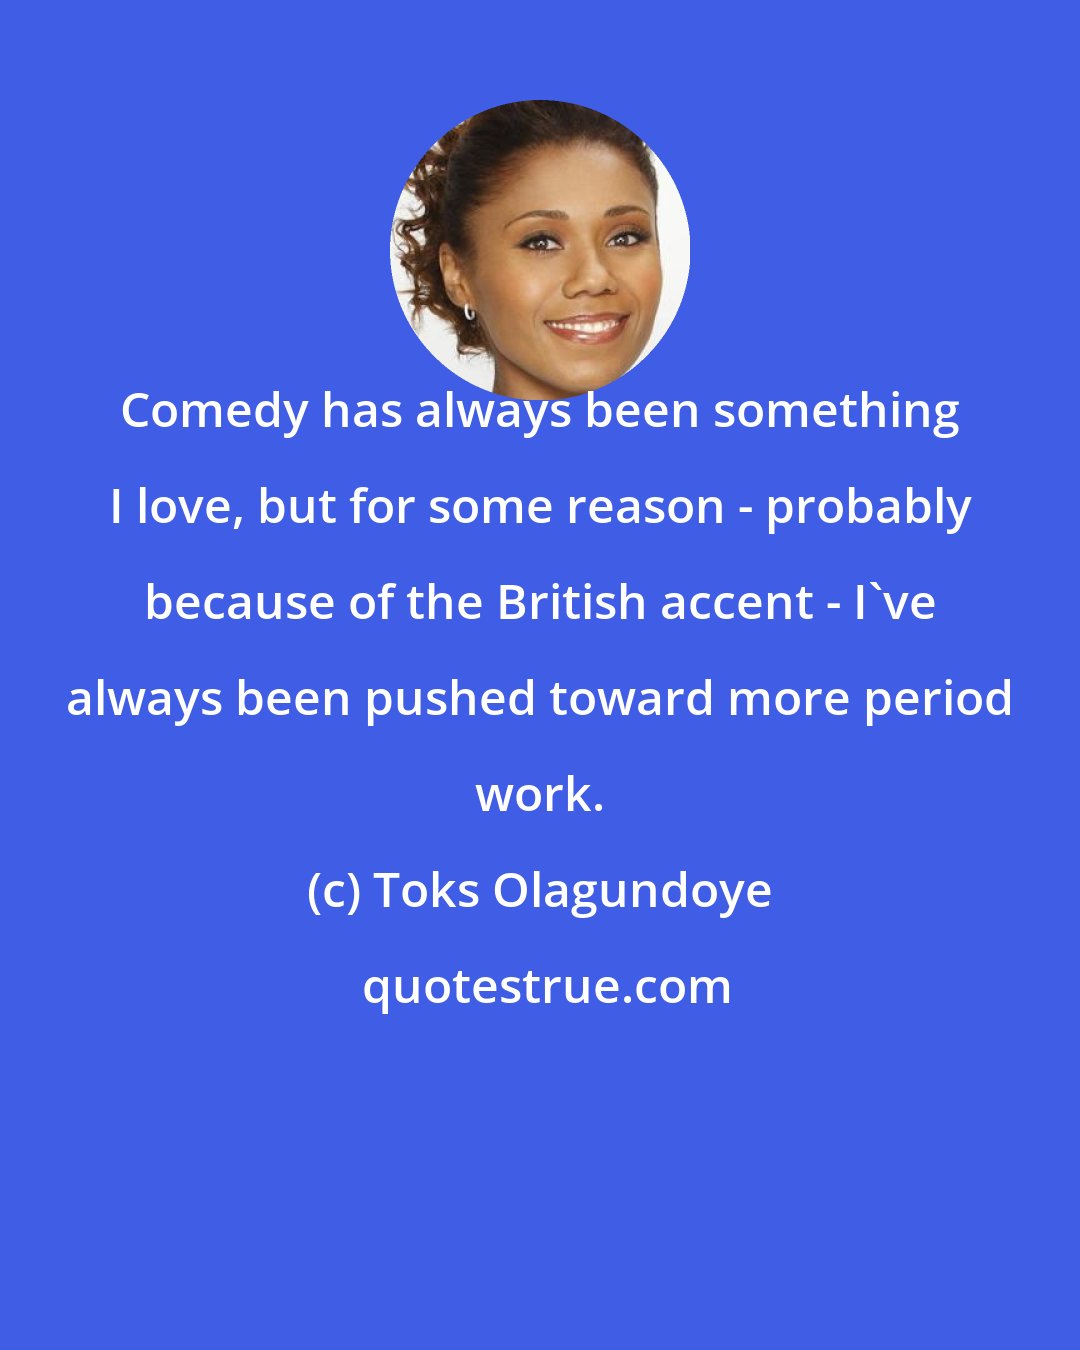 Toks Olagundoye: Comedy has always been something I love, but for some reason - probably because of the British accent - I've always been pushed toward more period work.